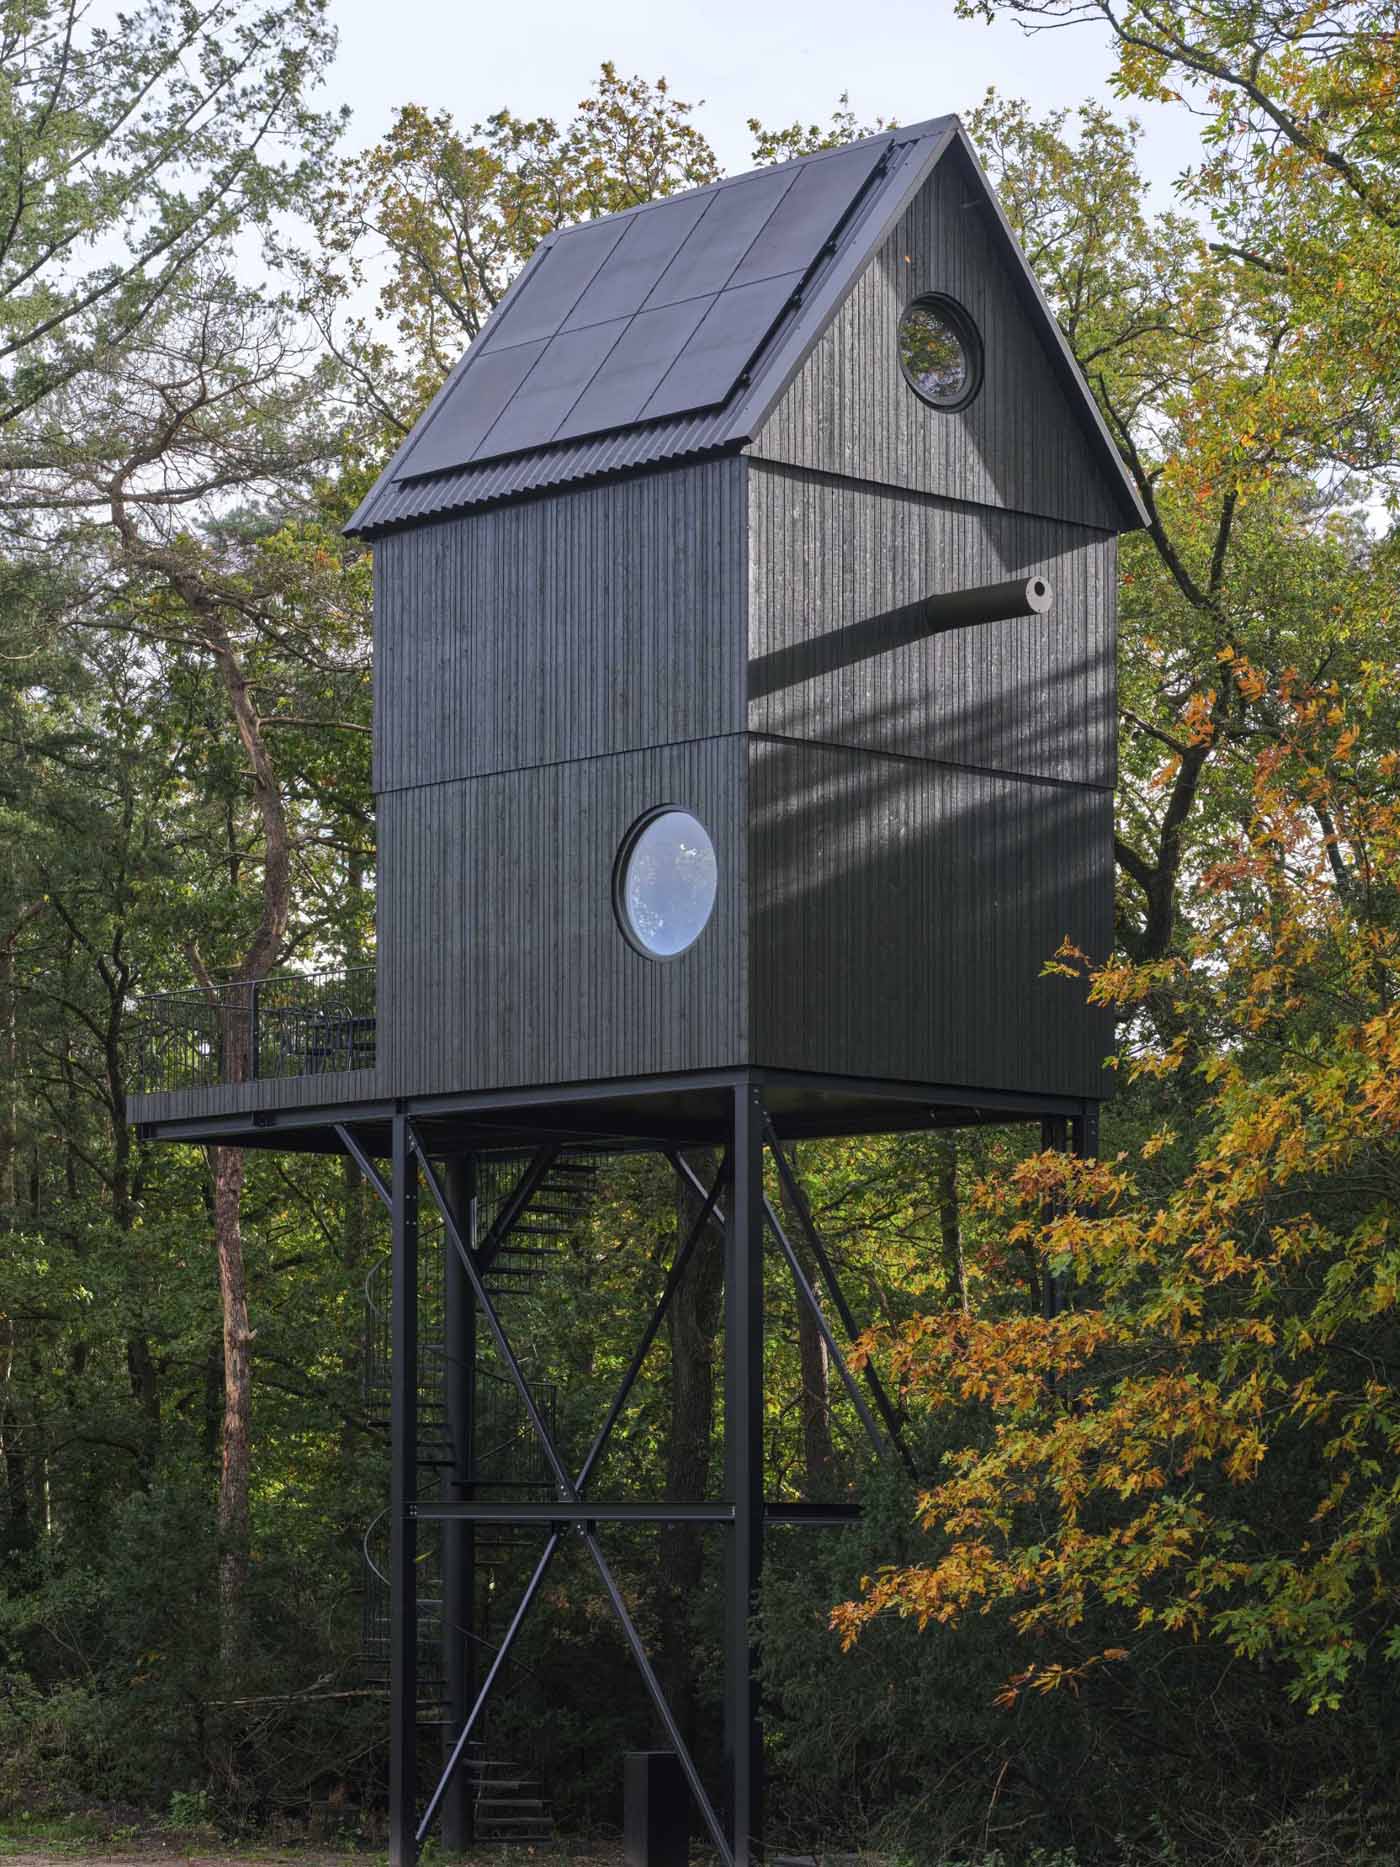 A small cabin that's designed as a multi-level elevated bird house.